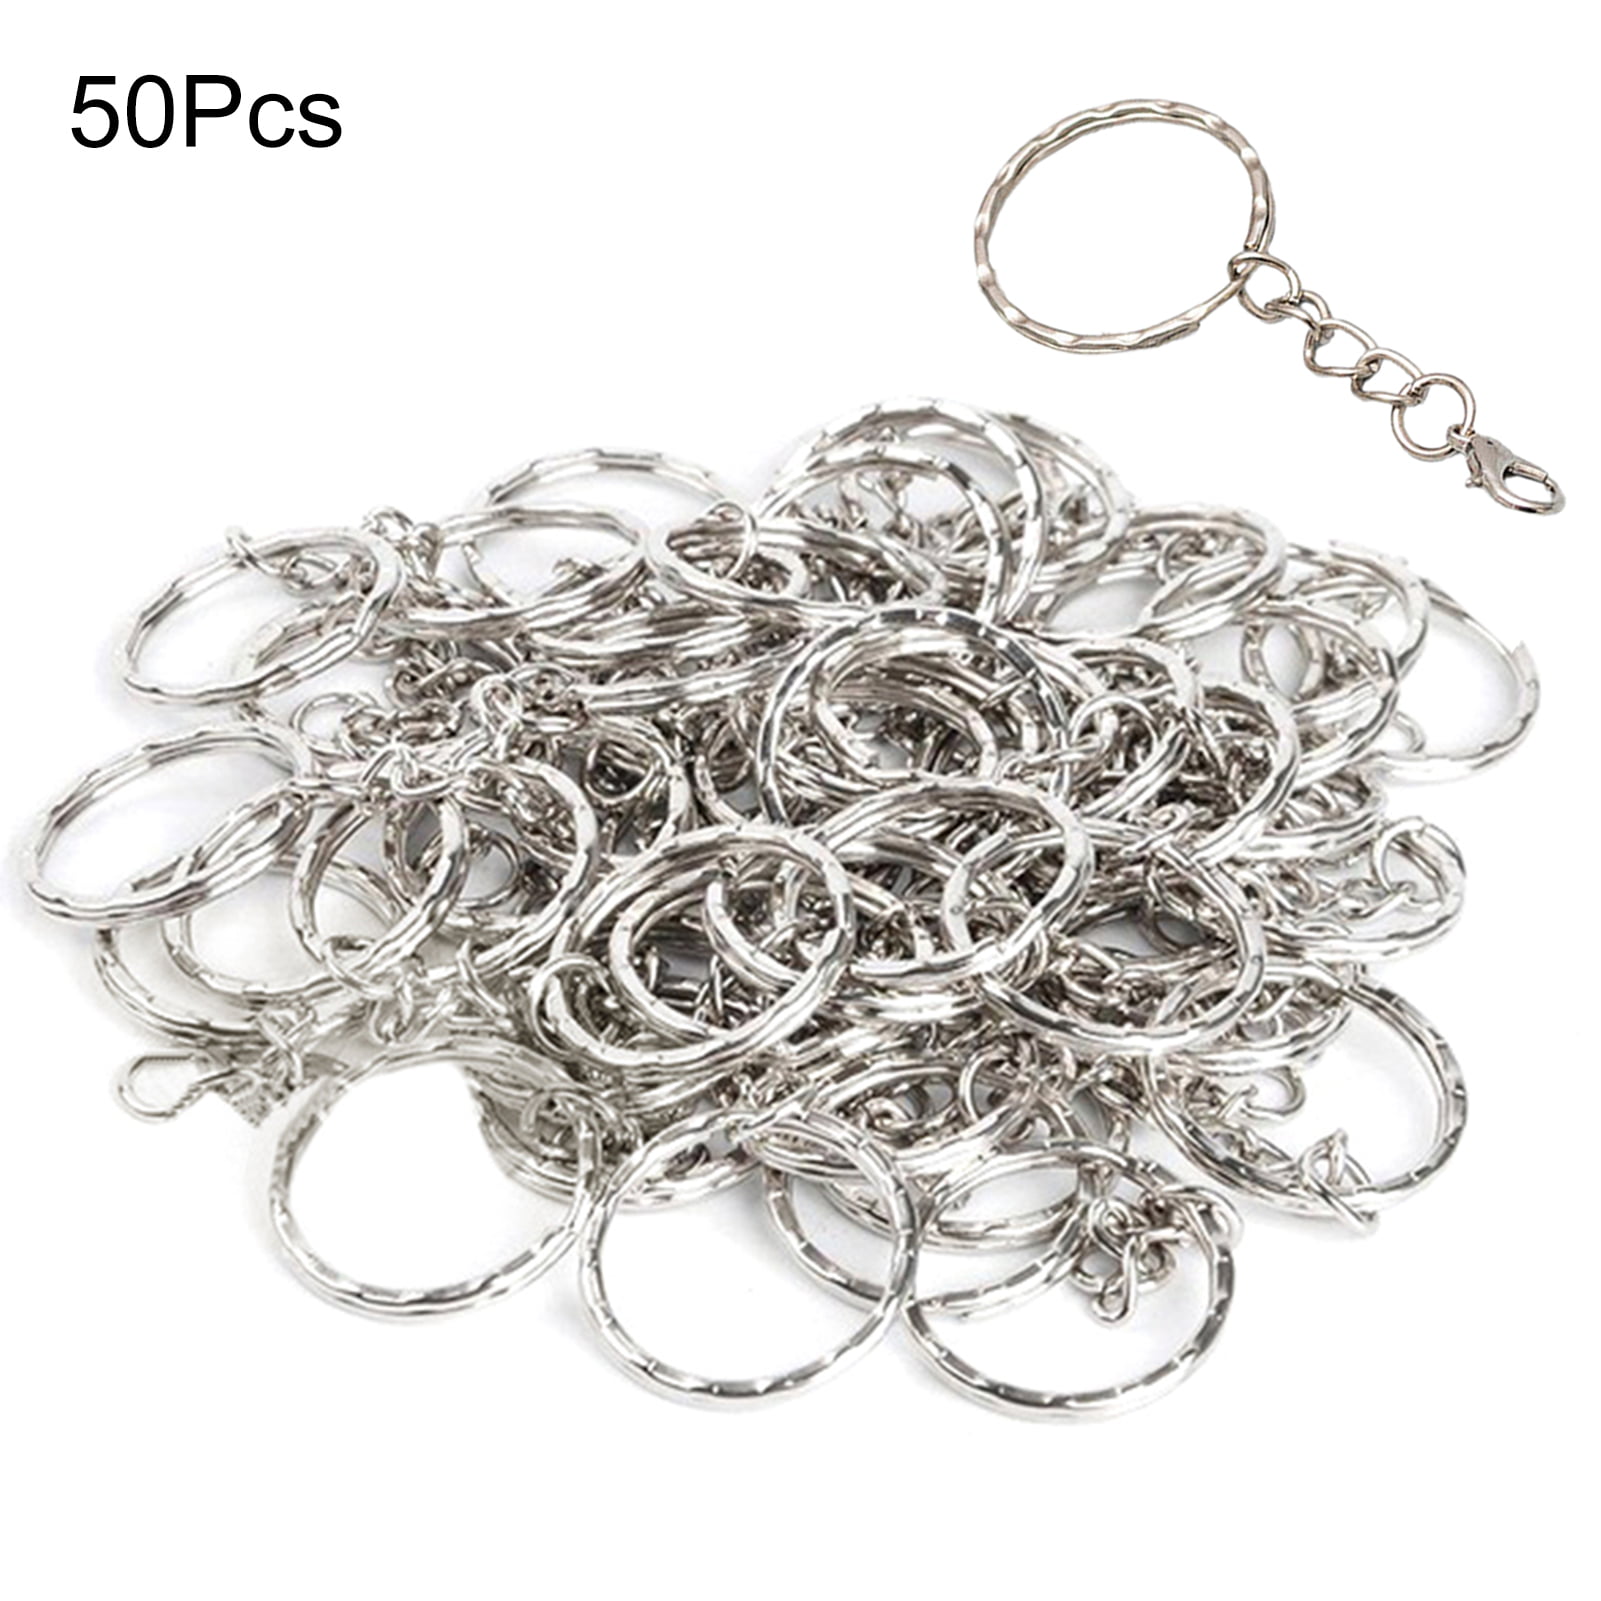 Gold Loop  Chain Craft Key Ring Split Rings 25mm Findings With 50pcs Double 